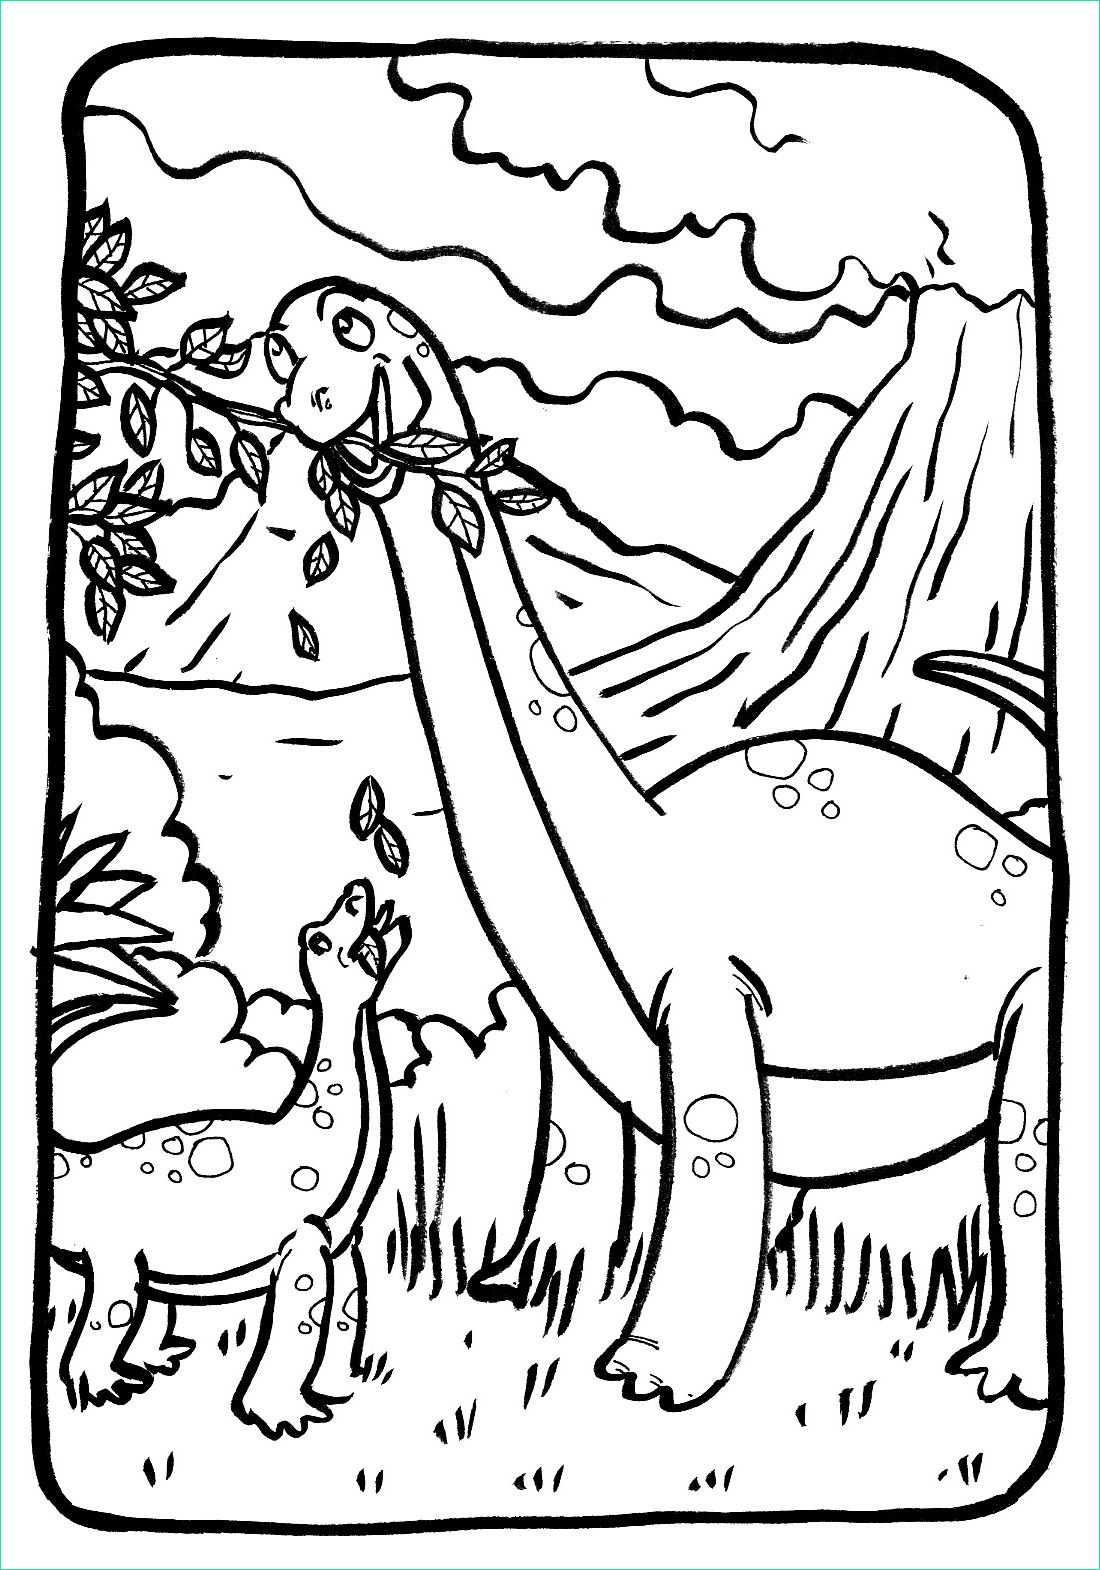 Coloriage Dinosaure A Imprimer Beau Photos Dinosaurs Free to Color for Kids Diplodocus Family